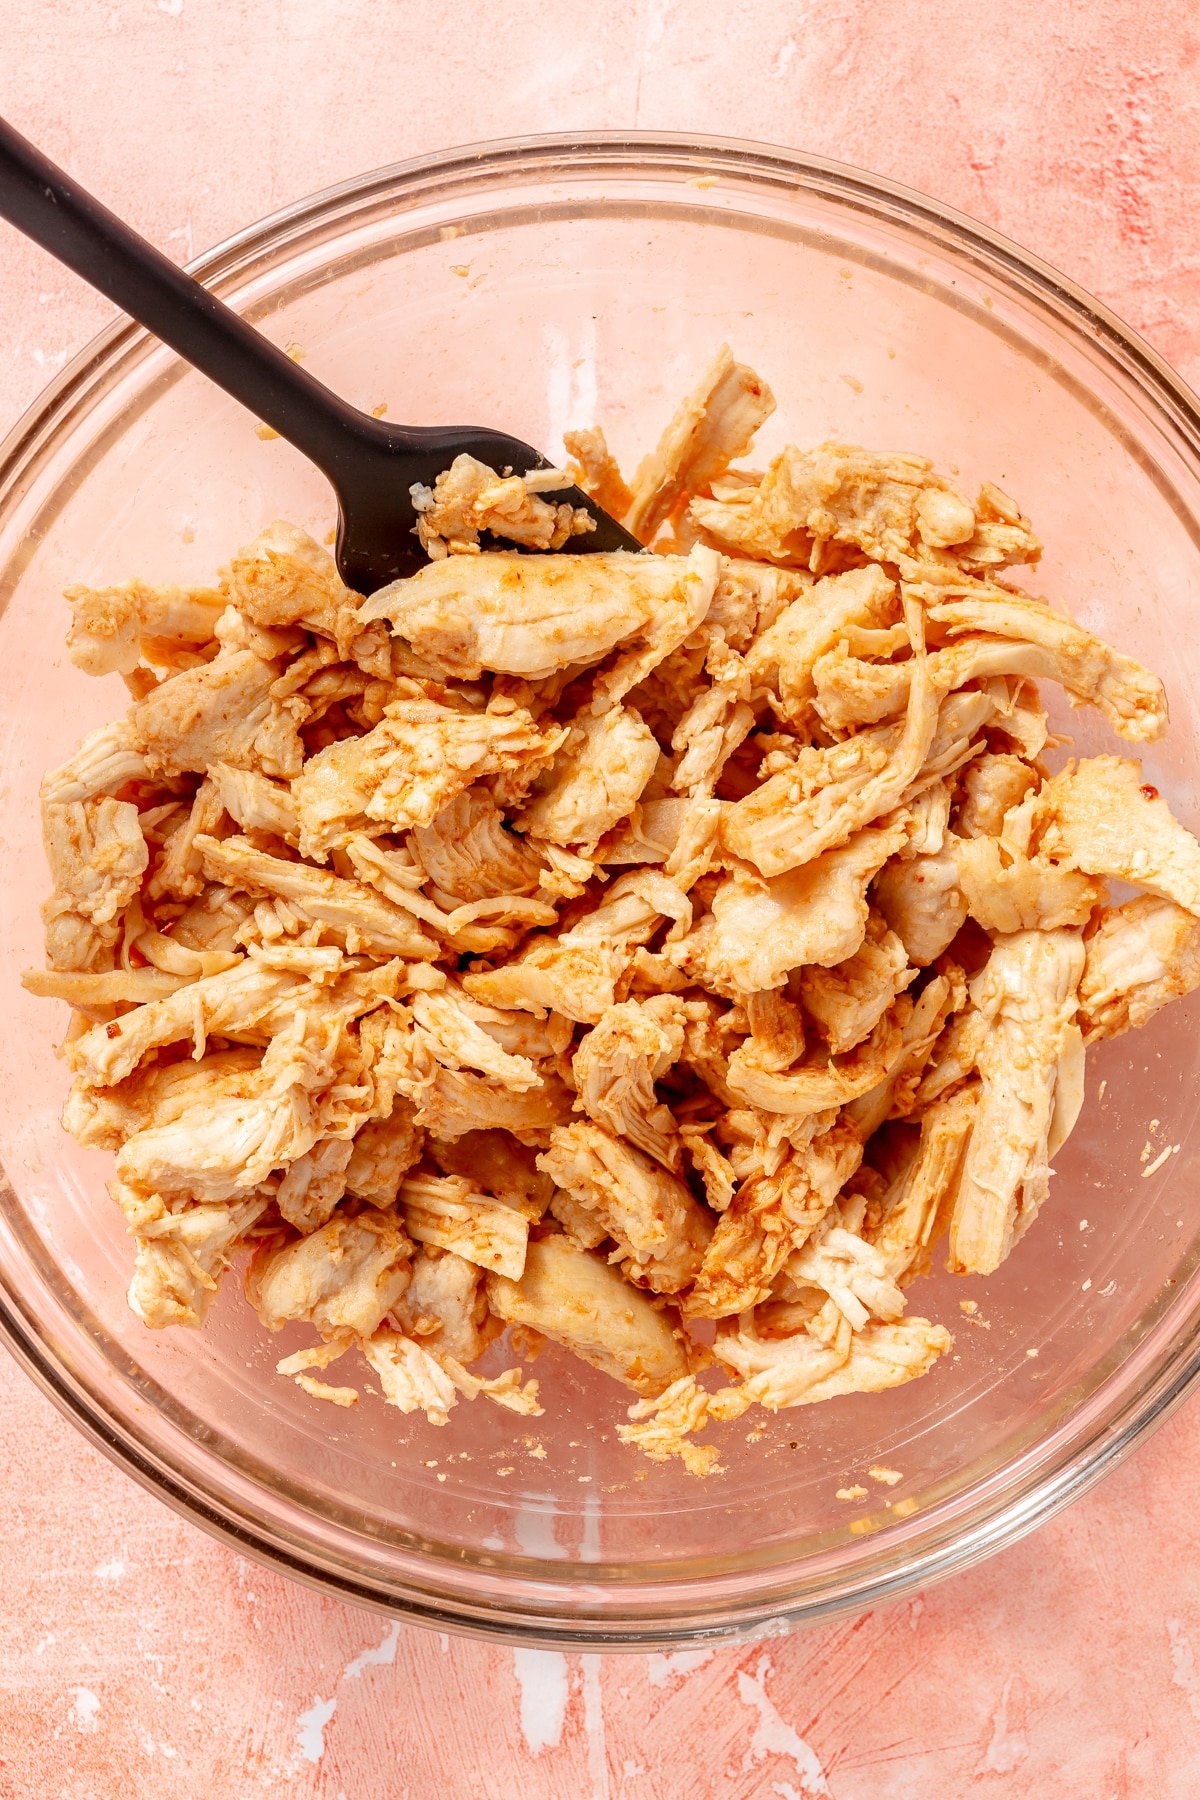 Shredded, seasoned chicken sits in a glass mixing bowl.